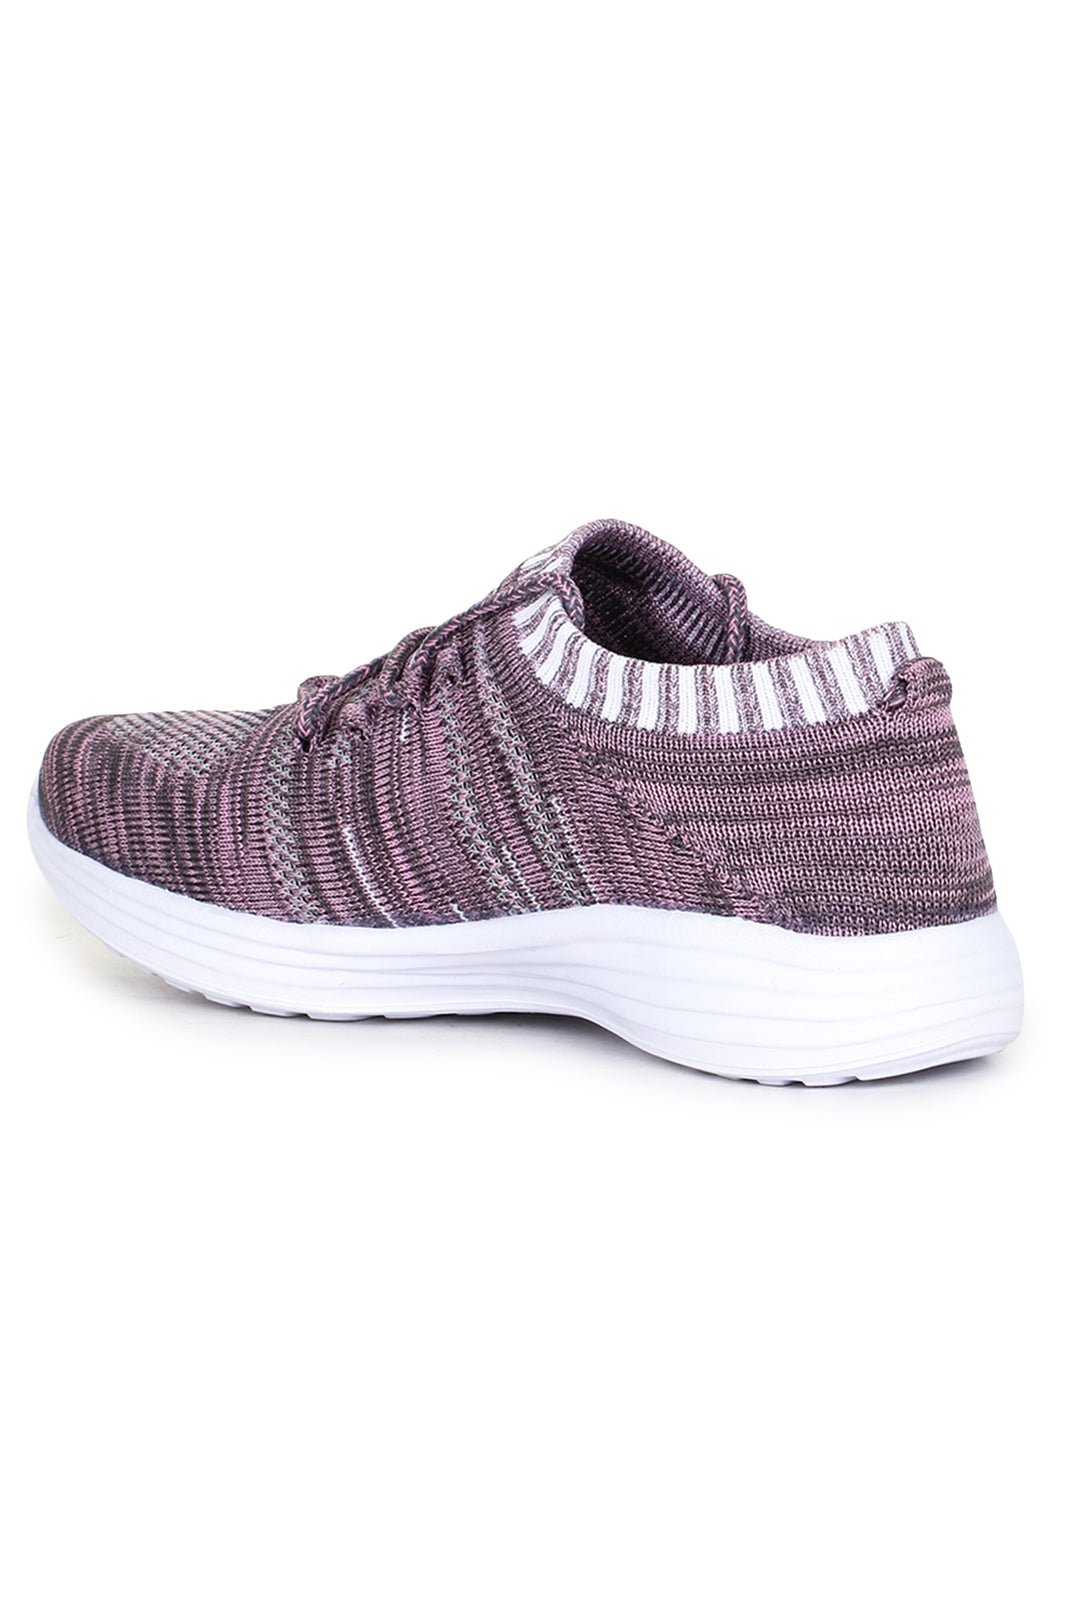 Grey Solid Mesh Lace Up Sports Shoes For Women